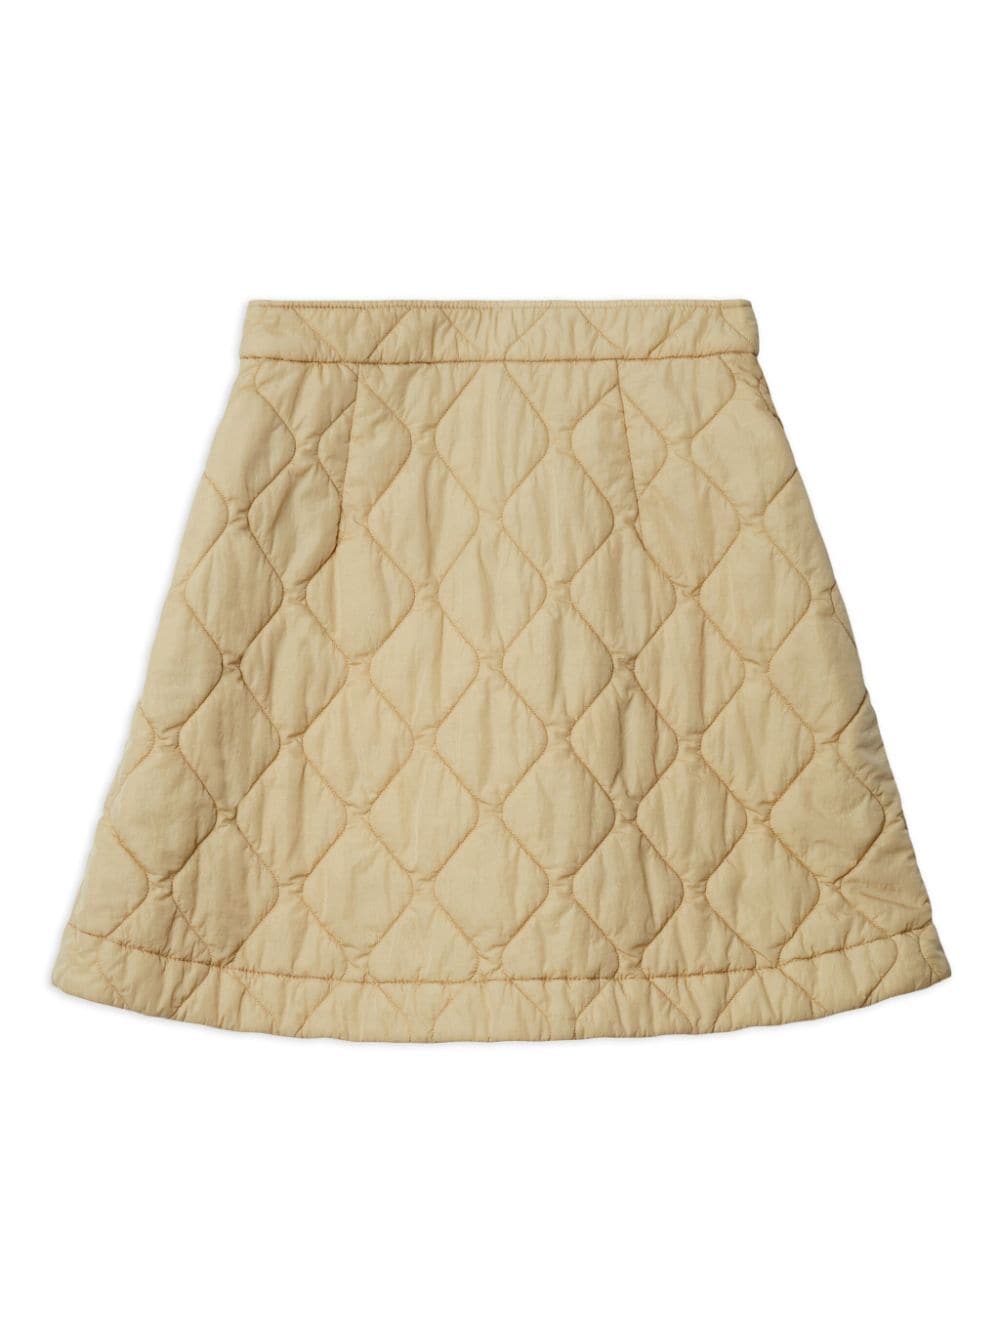 BURBERRY Almond Beige Diamond Quilting Signature Equestrian Knight Embroidered A-Line High Waist Skirt - White